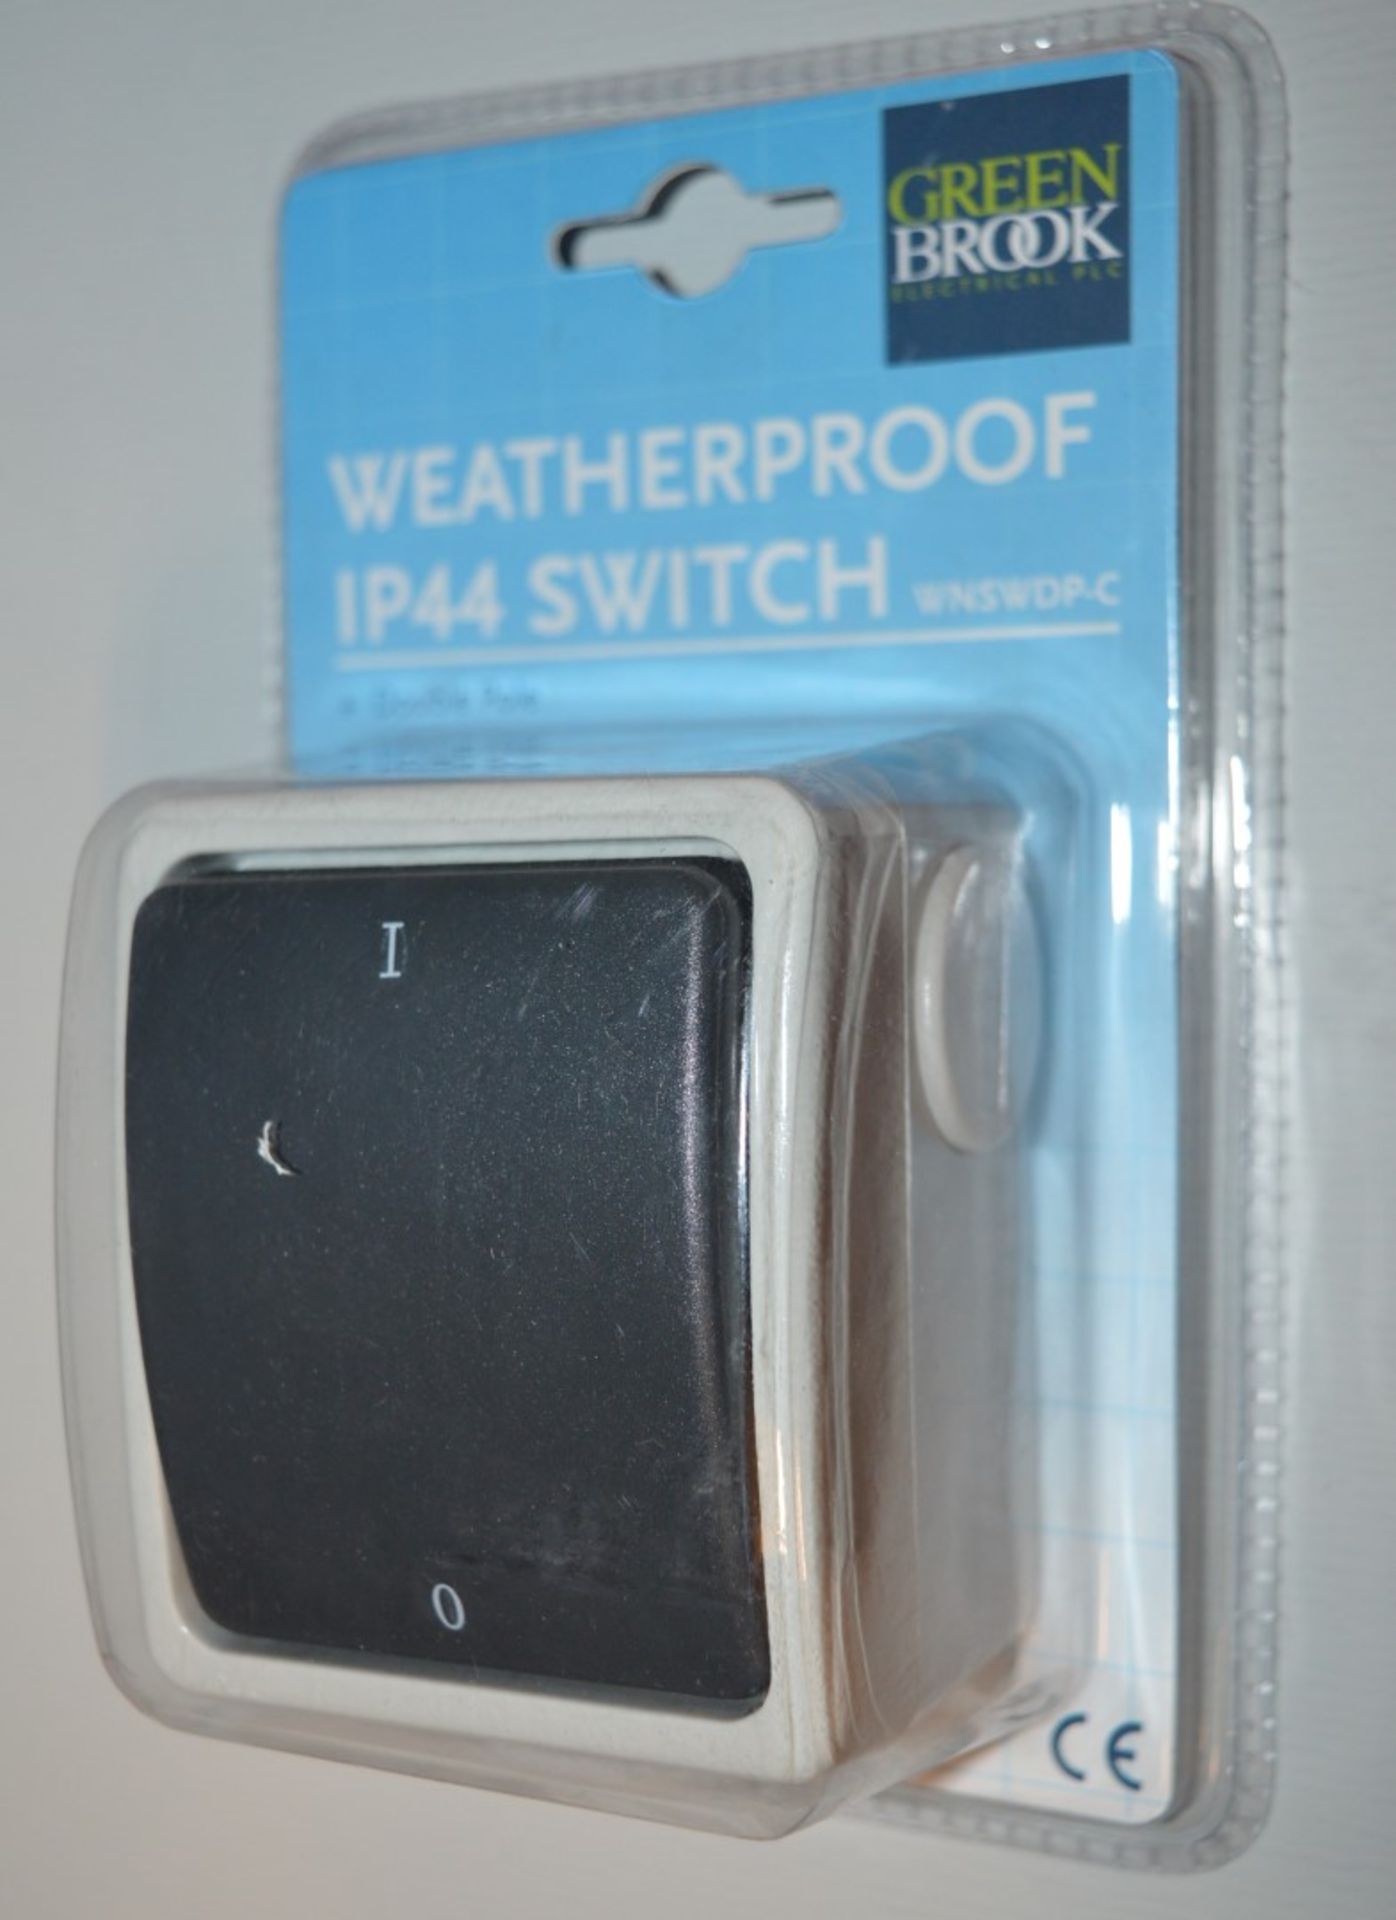 14 x Greenbrook Weatherproof Outdoor Single Switches - Suitable For Sheds etc - Brand New Stock - - Image 2 of 4